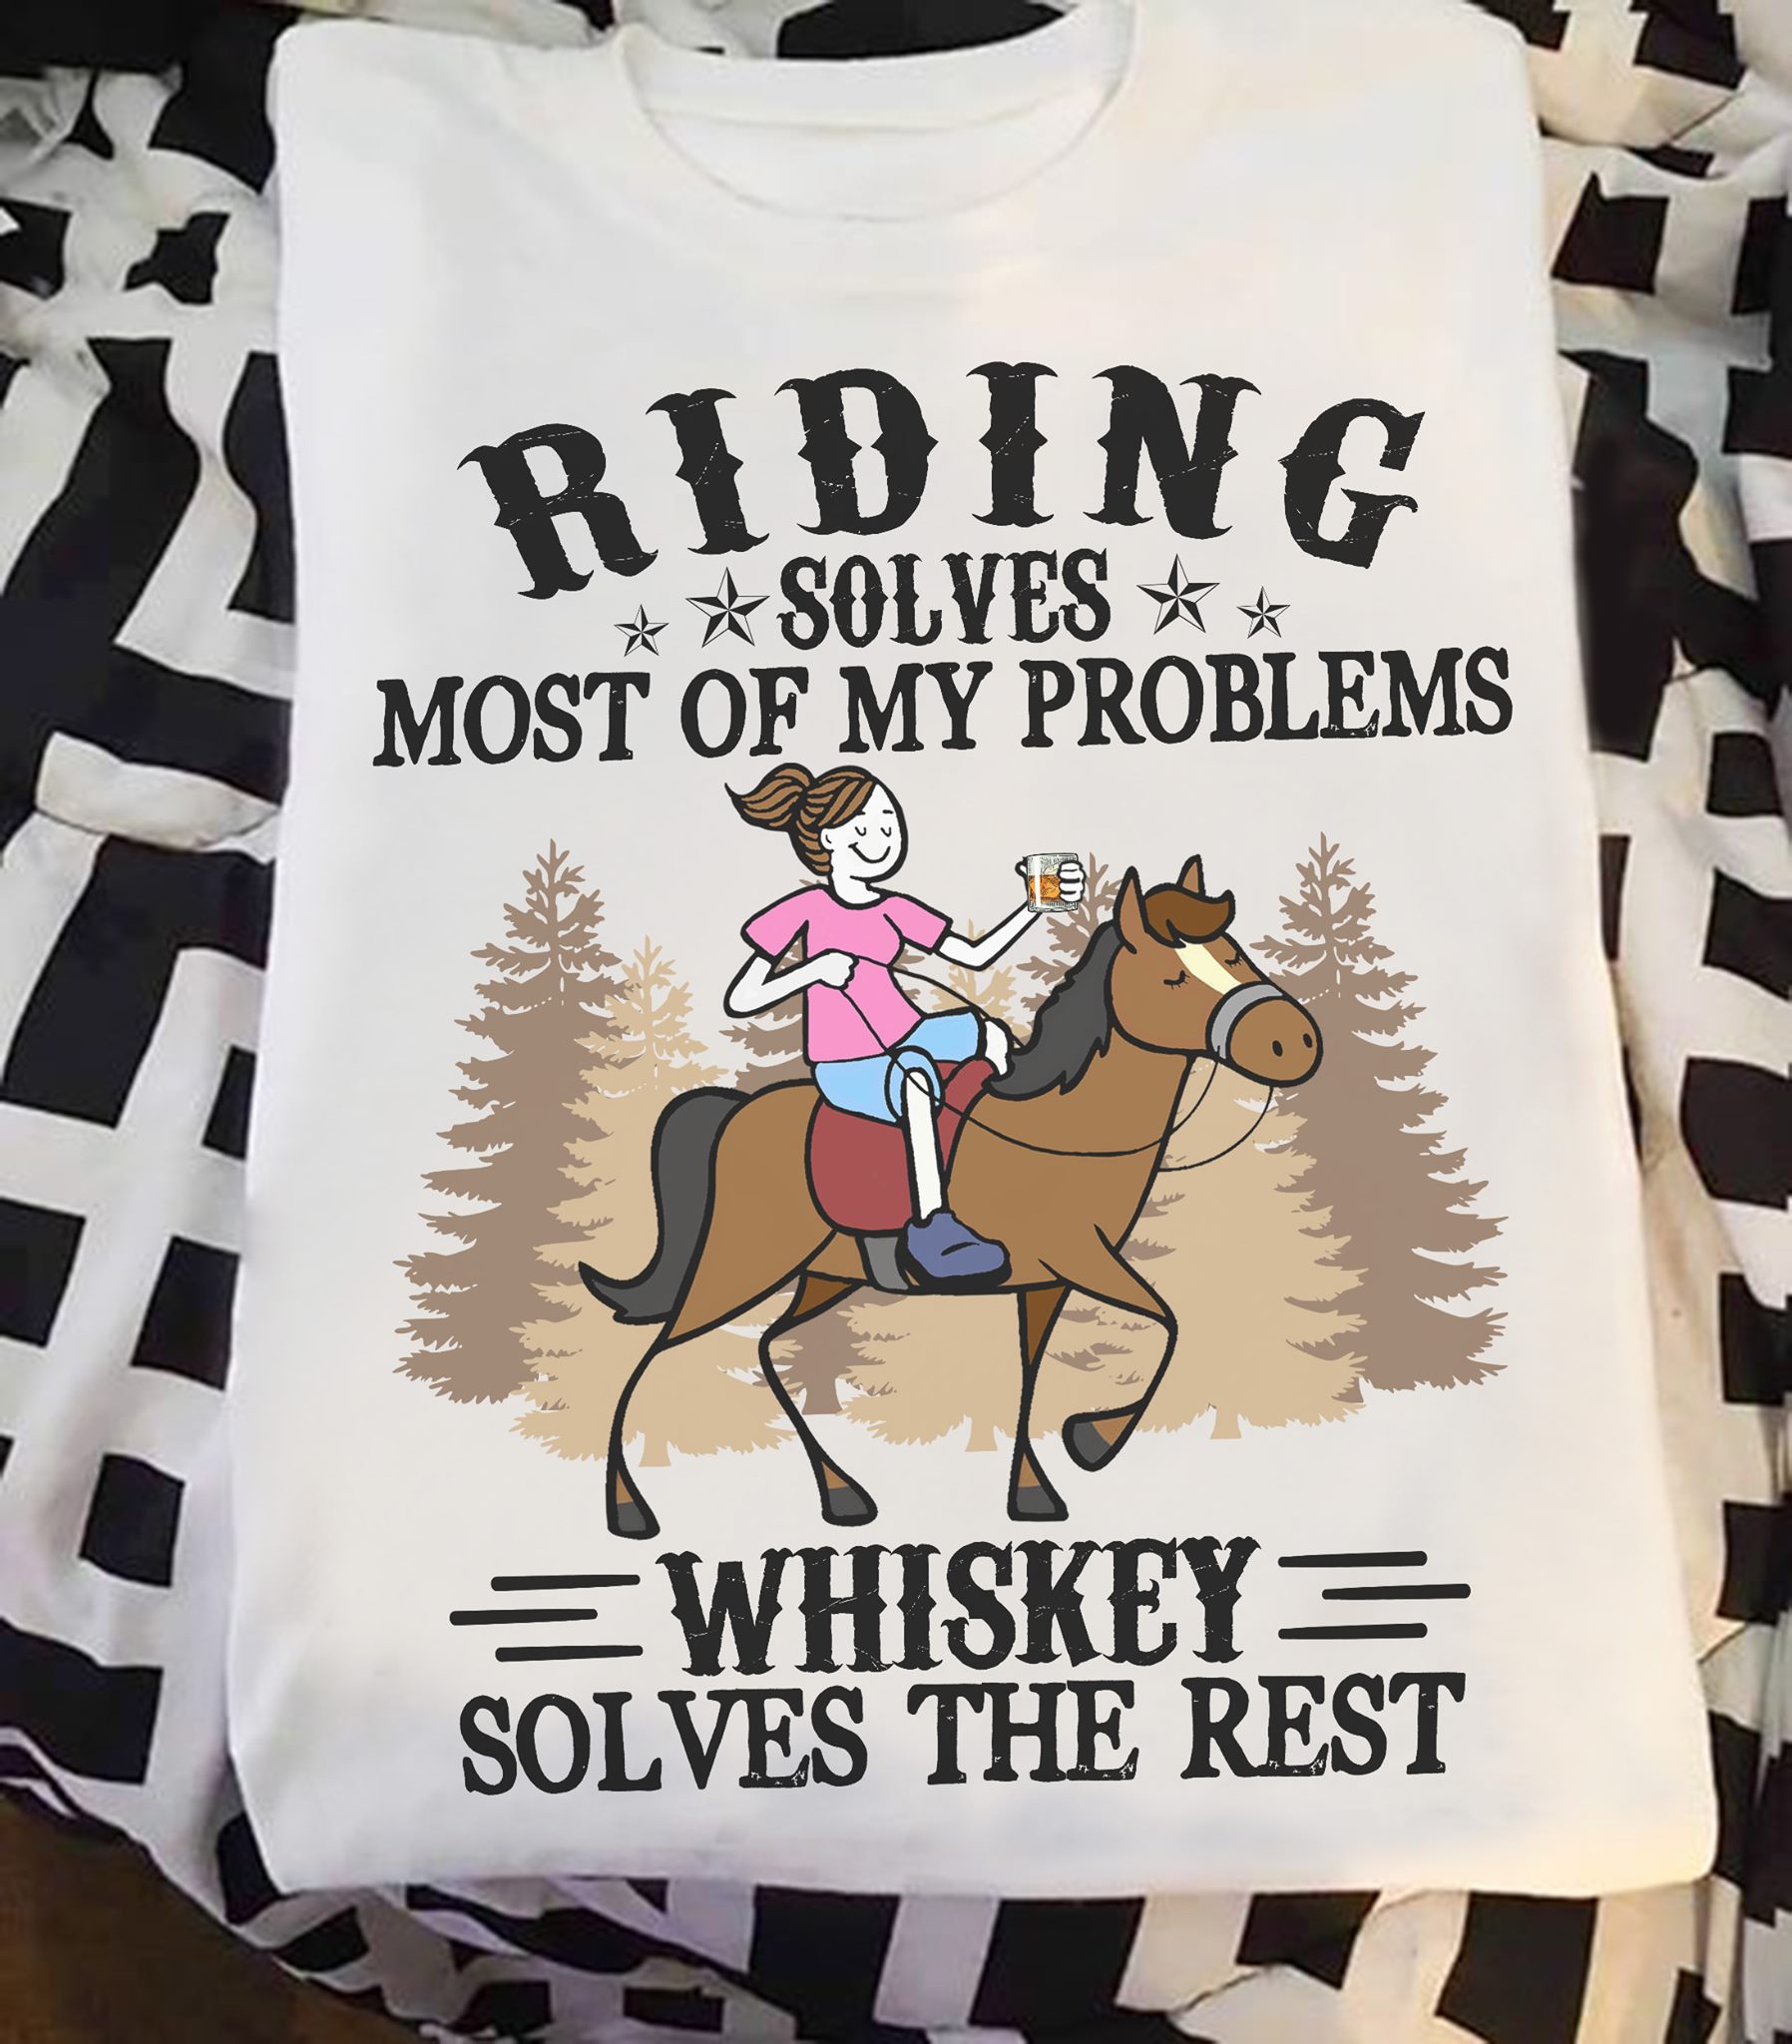 Riding solves most of my problems whiskey solves the rest - Whiskey and horse